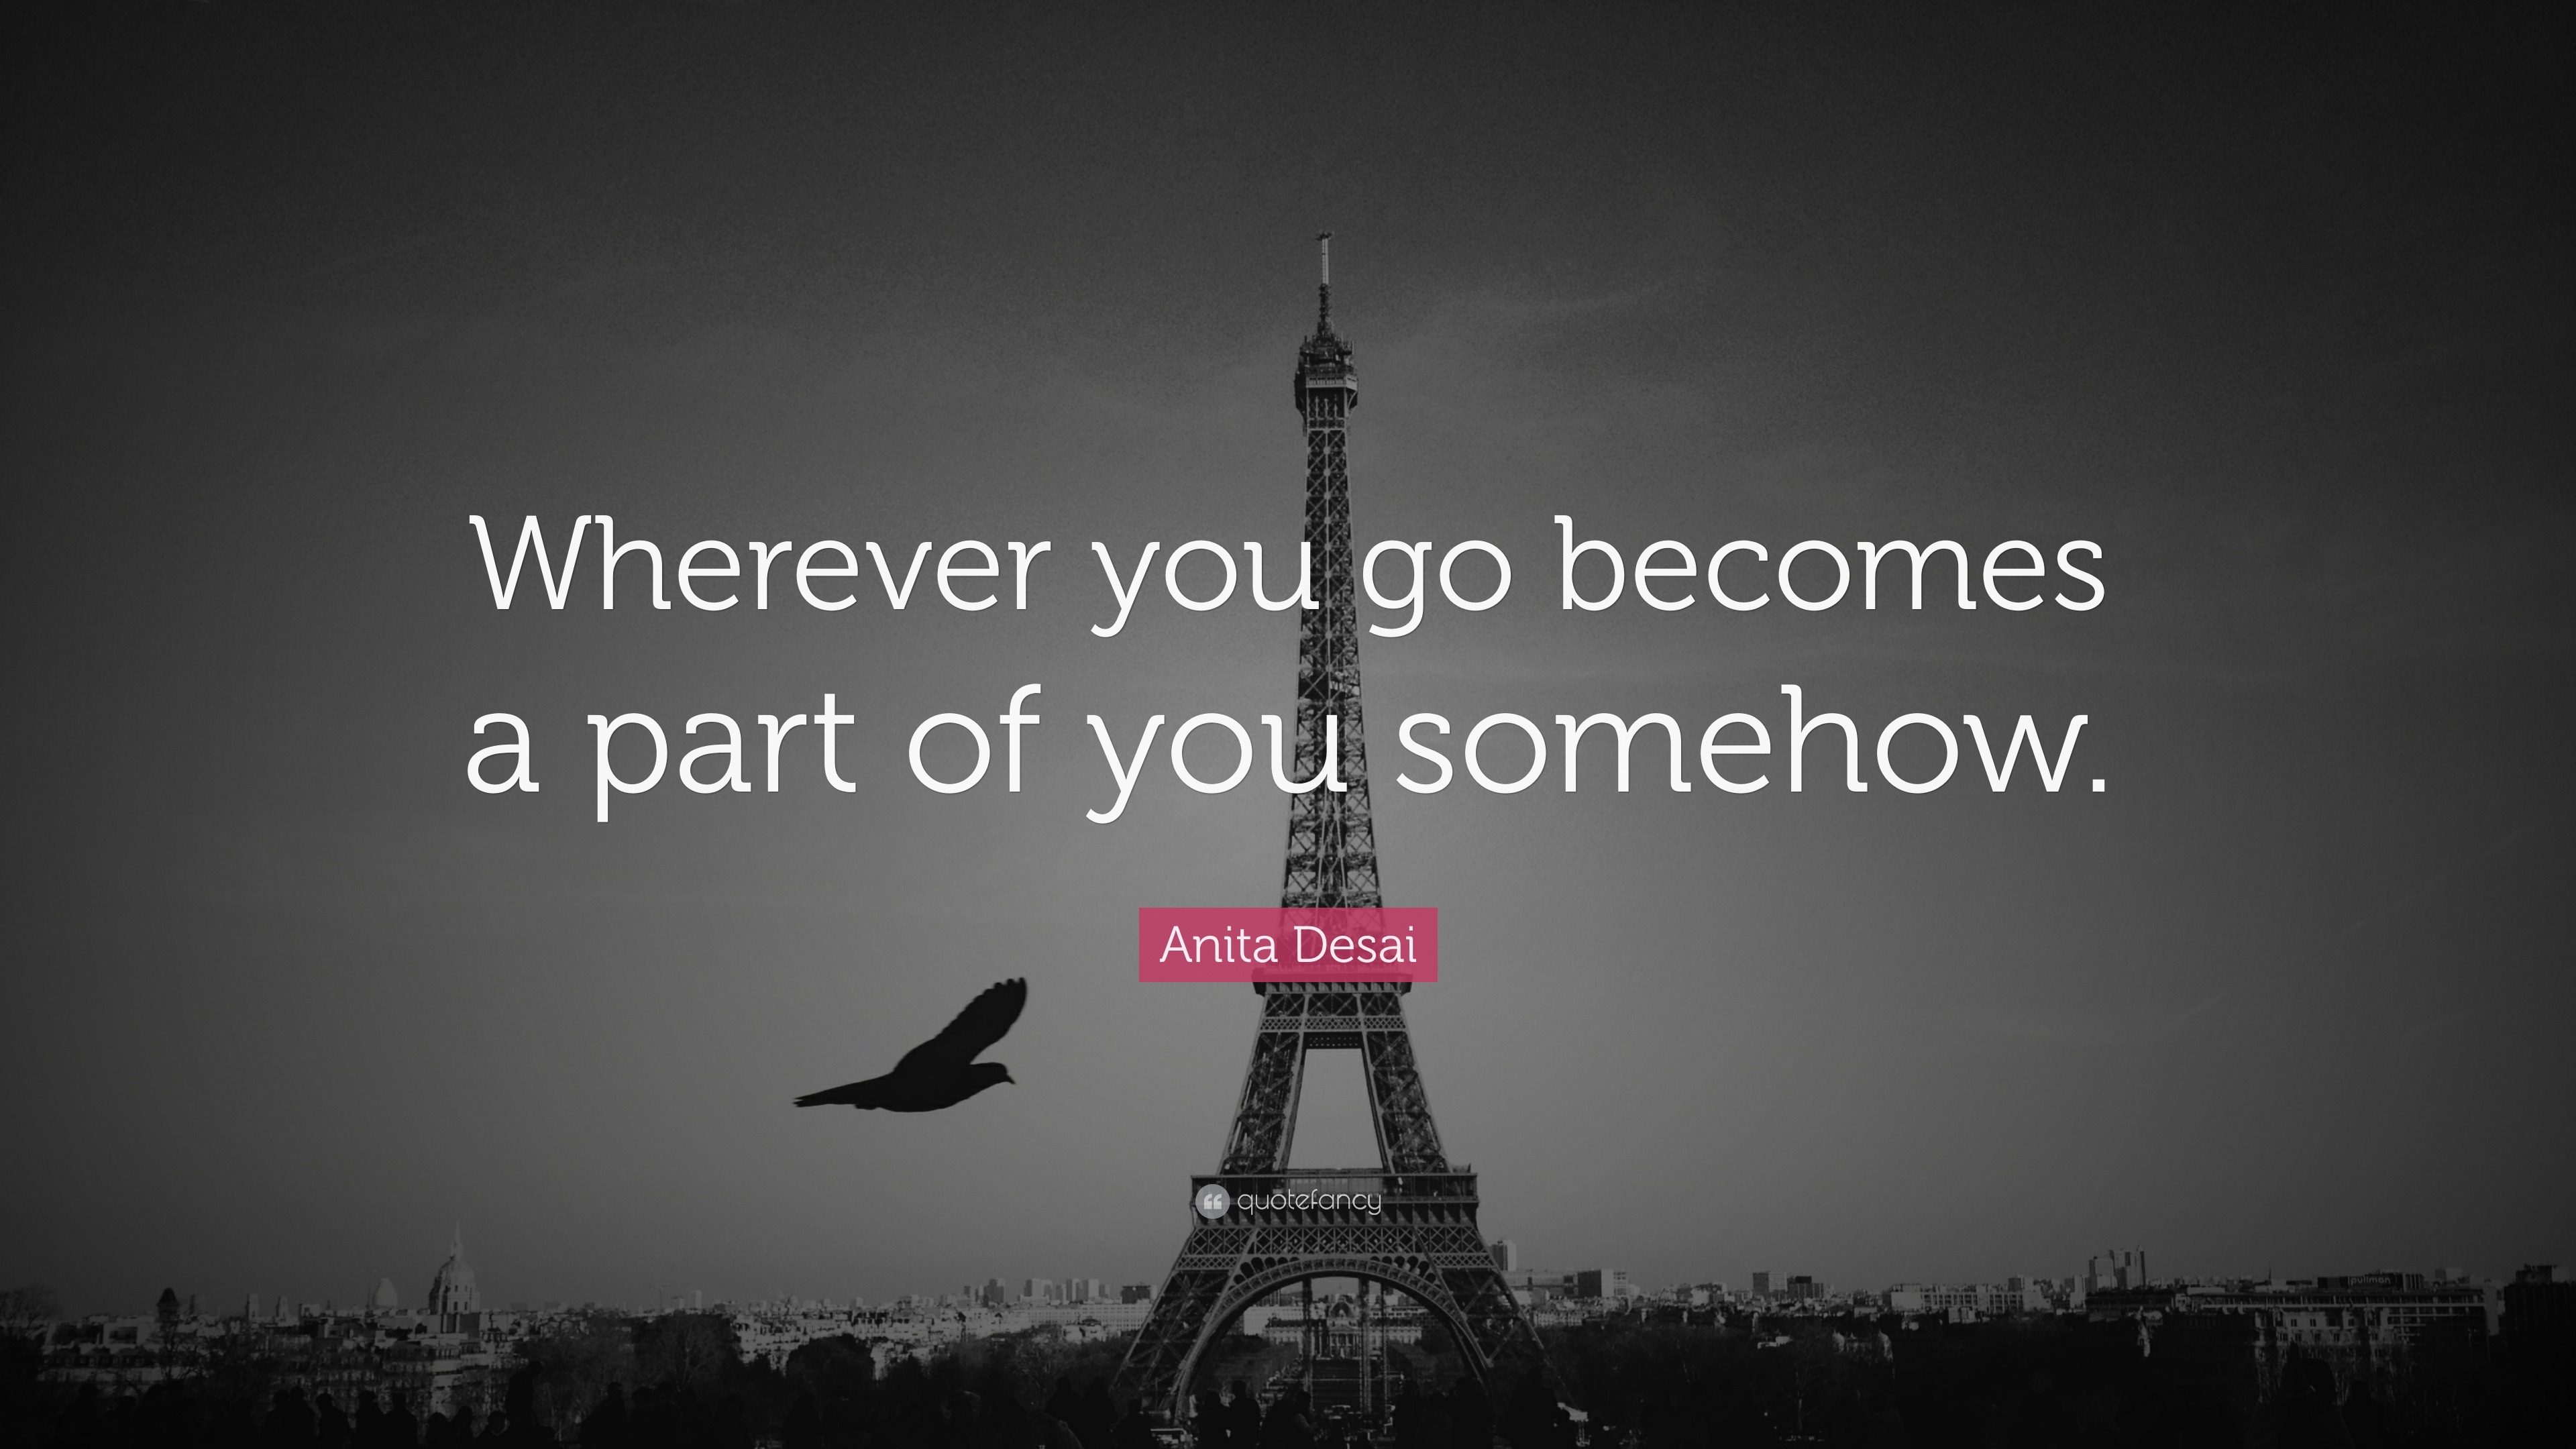 Anita Desai Quote: “Wherever you go becomes a part of you somehow.”